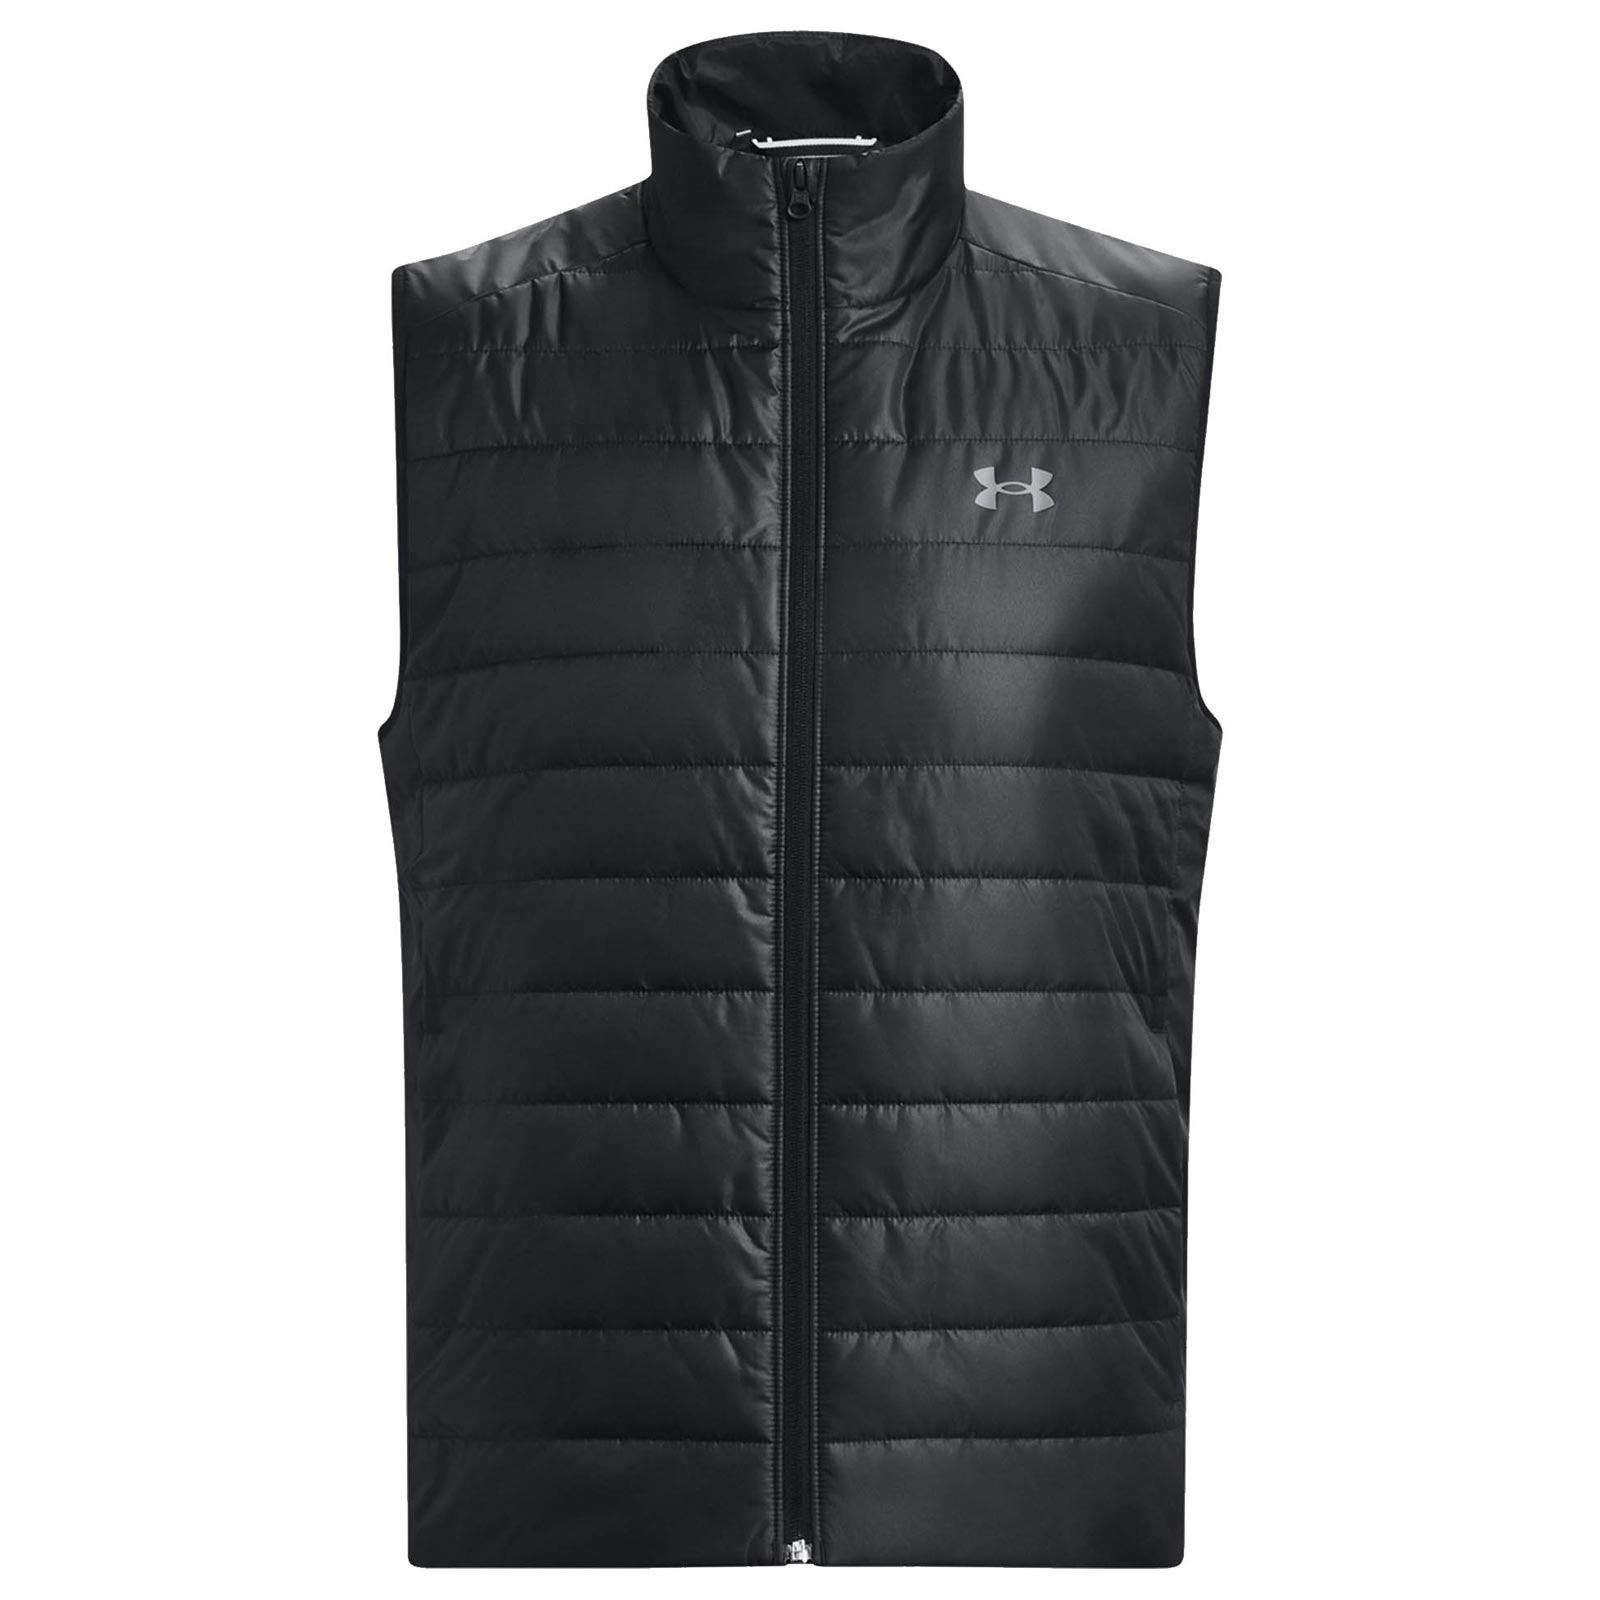 UNDER ARMOUR STORM MENS INSULATED VEST